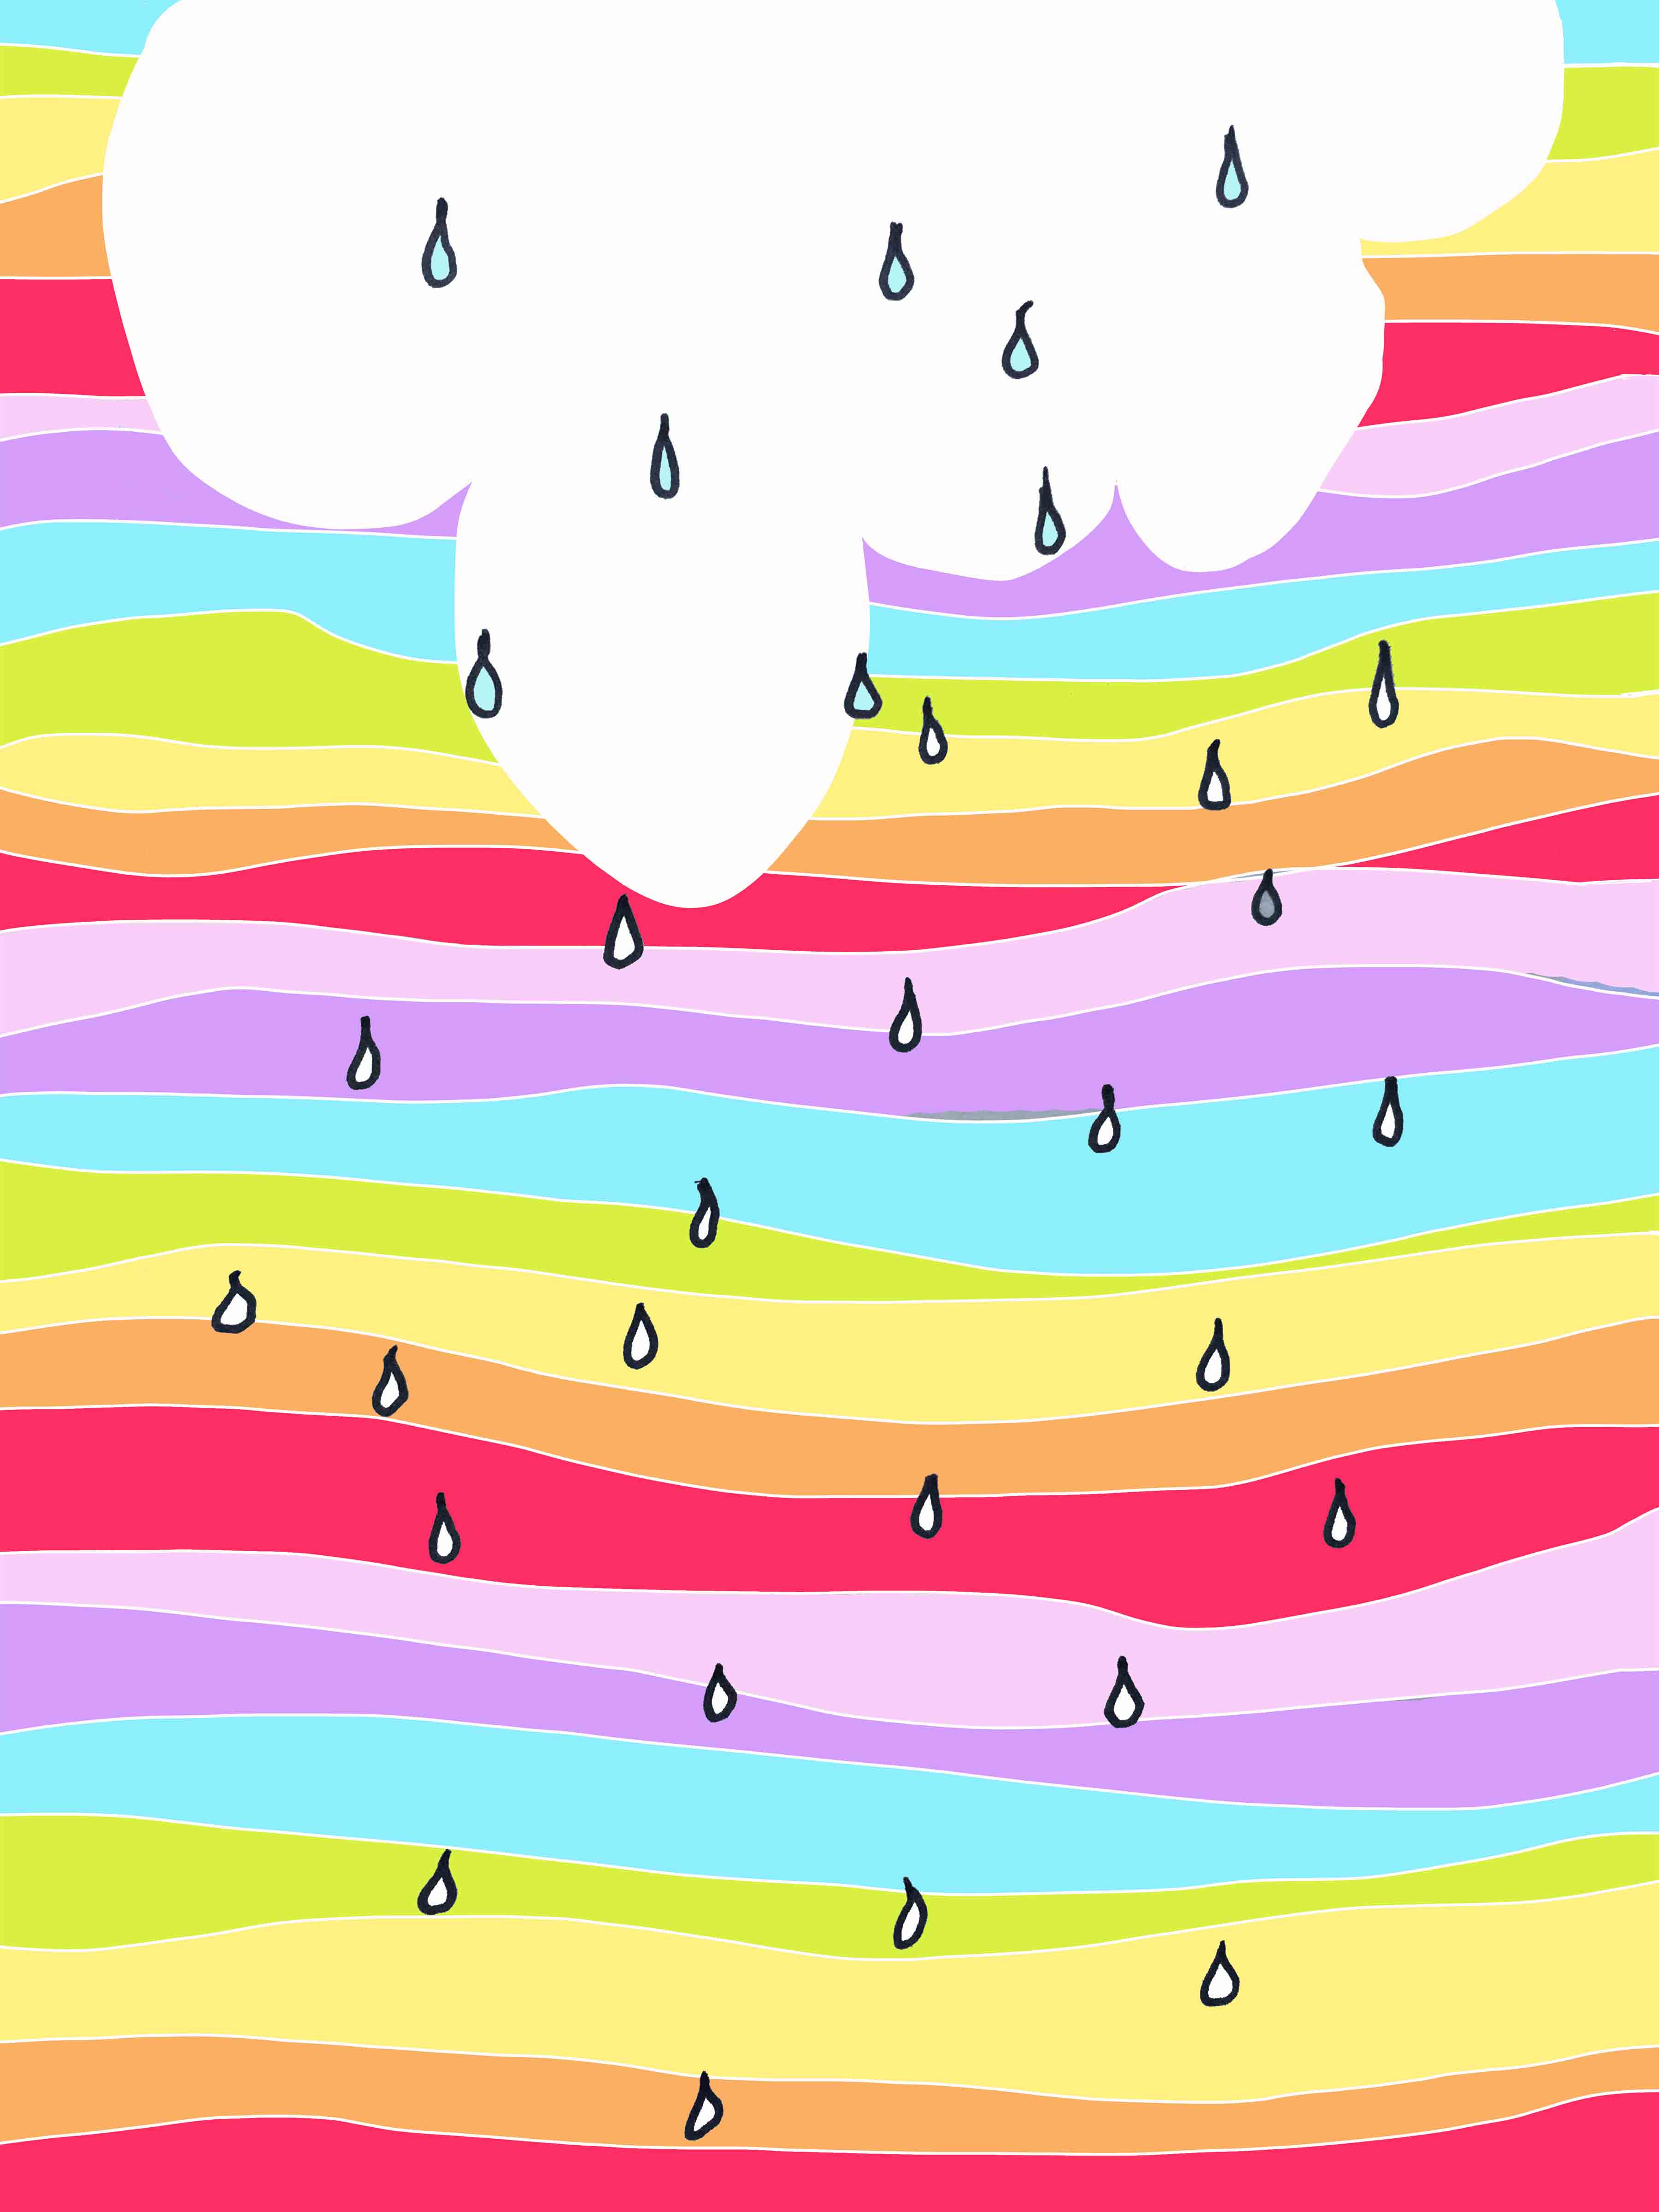 art every day number 164 / doodle / drawing / fall showers